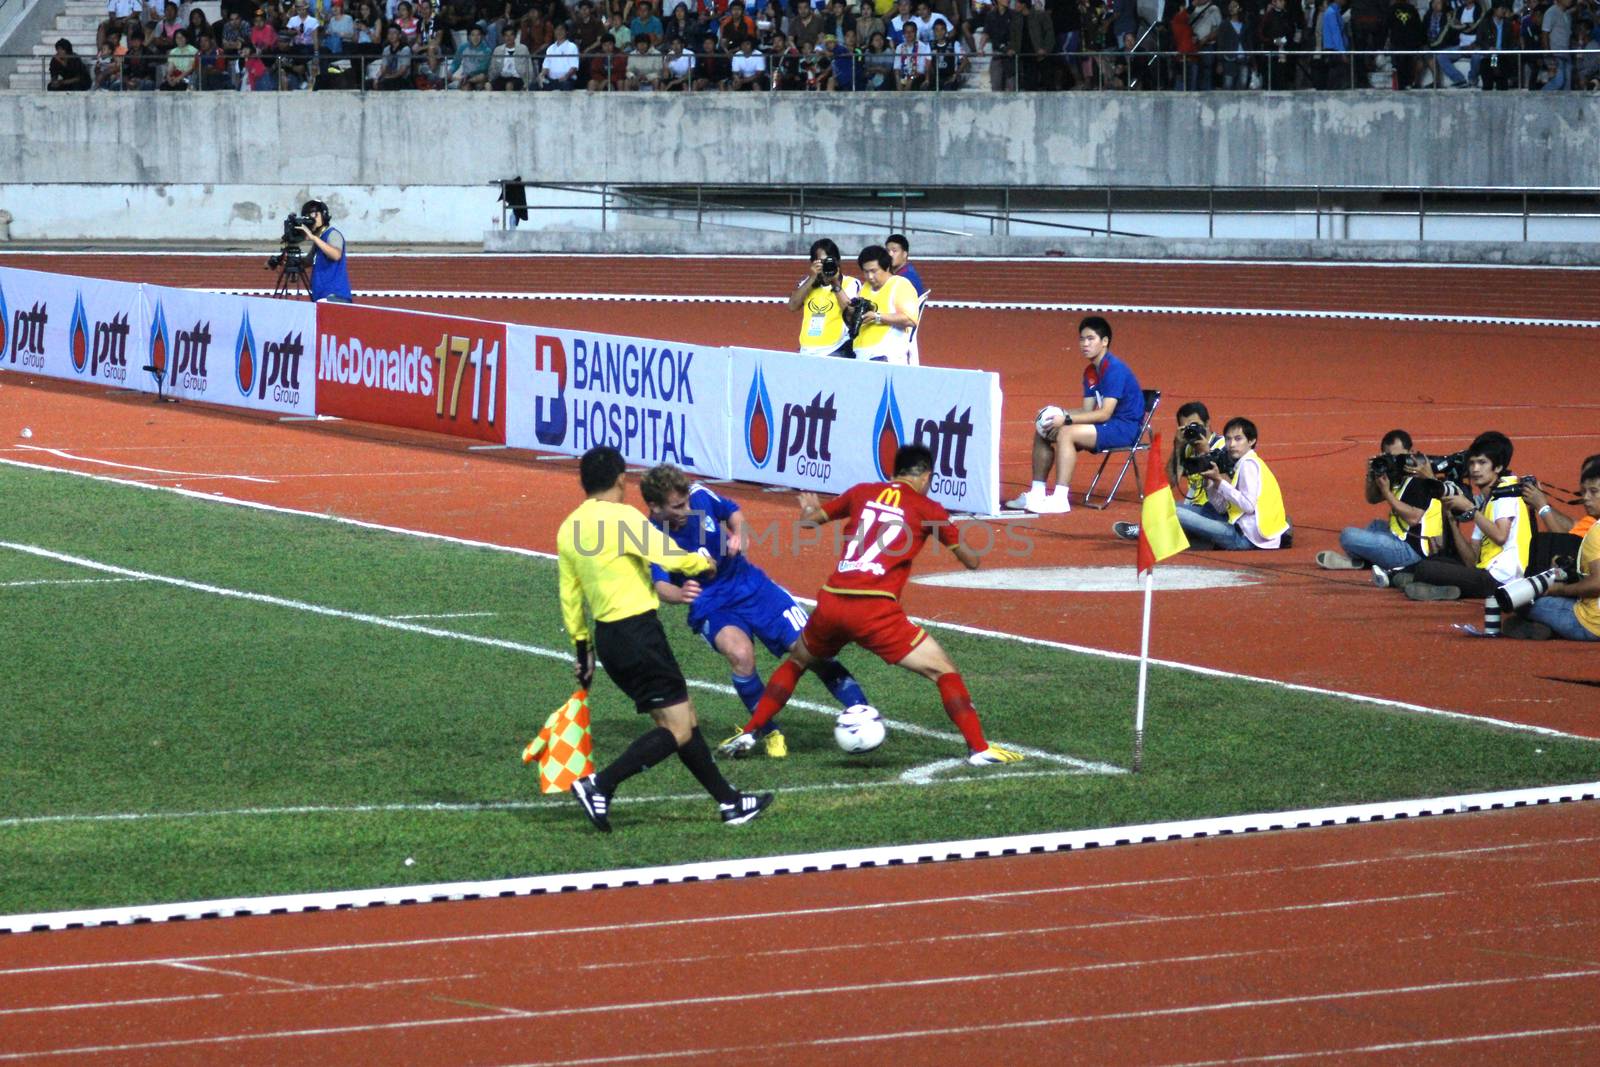 The 42nd King's cup international football match between Thailand and Finland at 700th Anniversary Stadium in Chiangmai, Thailand. Finland defeat Thailand 3-1 to win. by mranucha